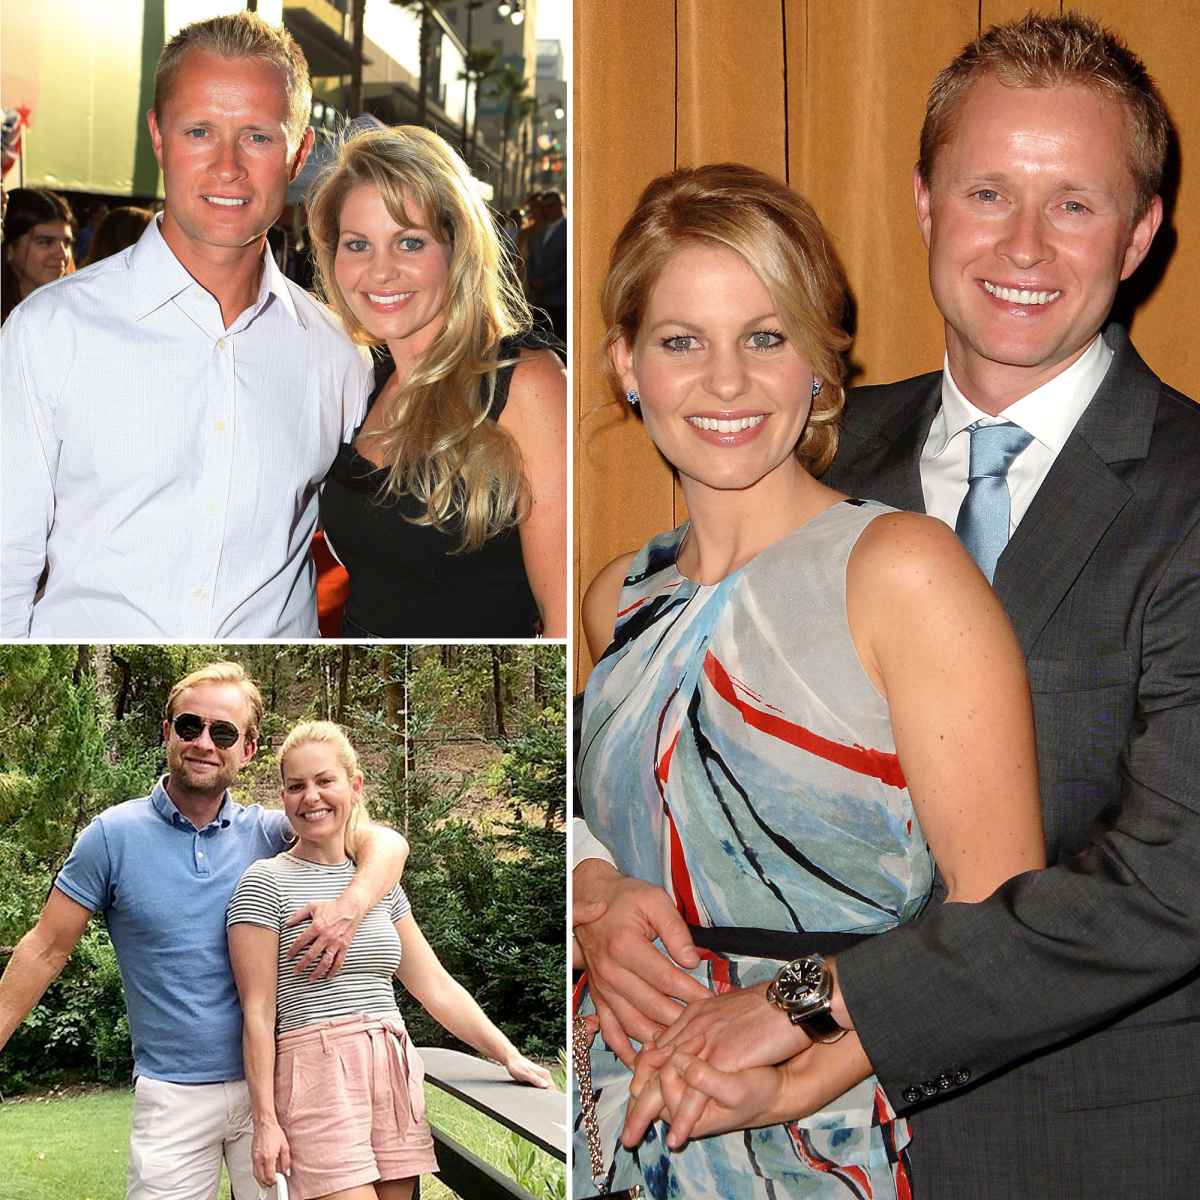 Who Is Candace Cameron Bure Married To? Get to Know This 'DWTS' Husband